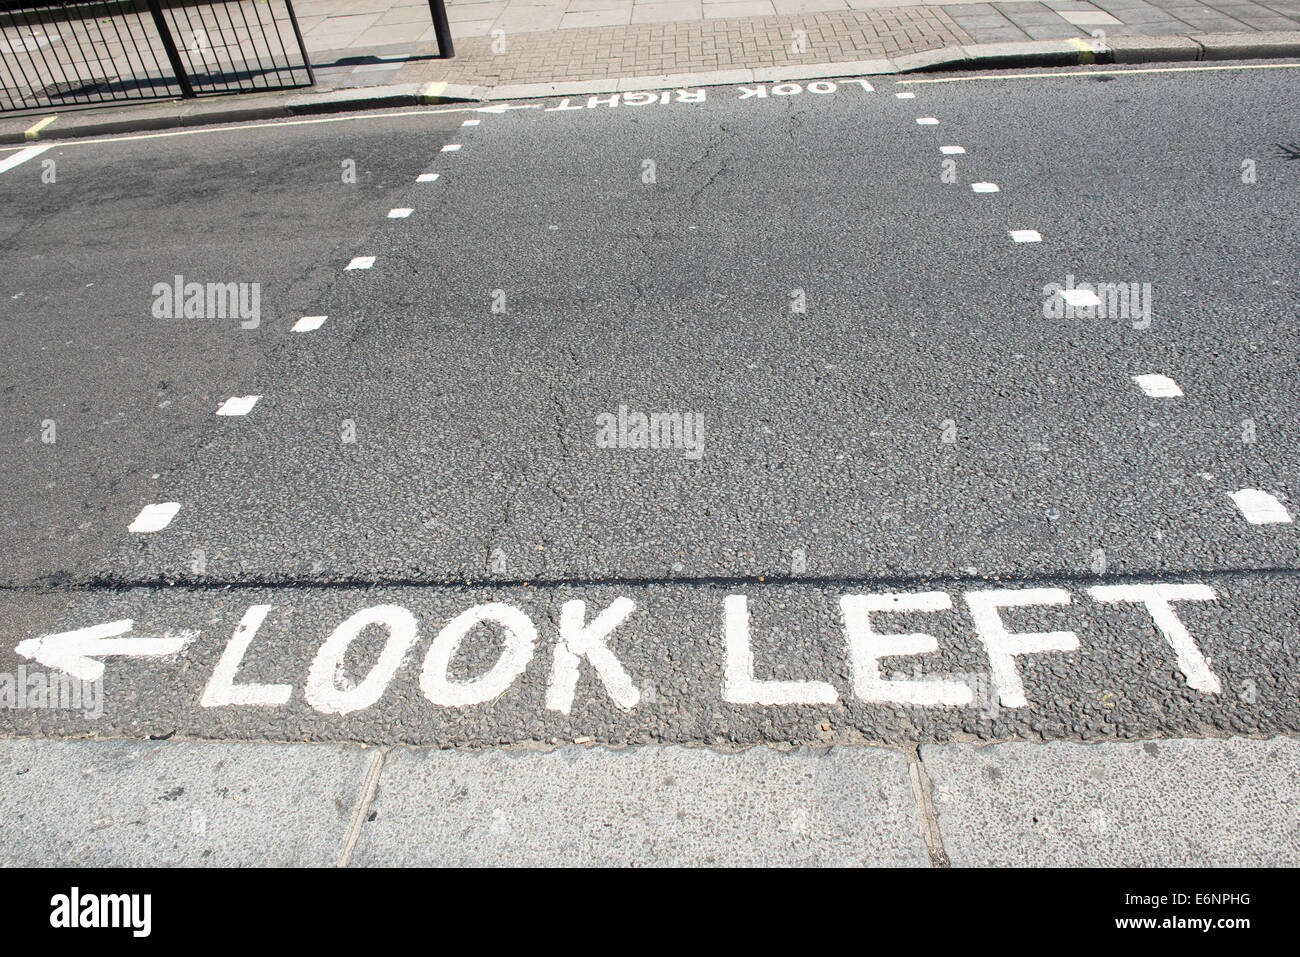 Sign on the floor of Look Left and look right on road london Stock Photo